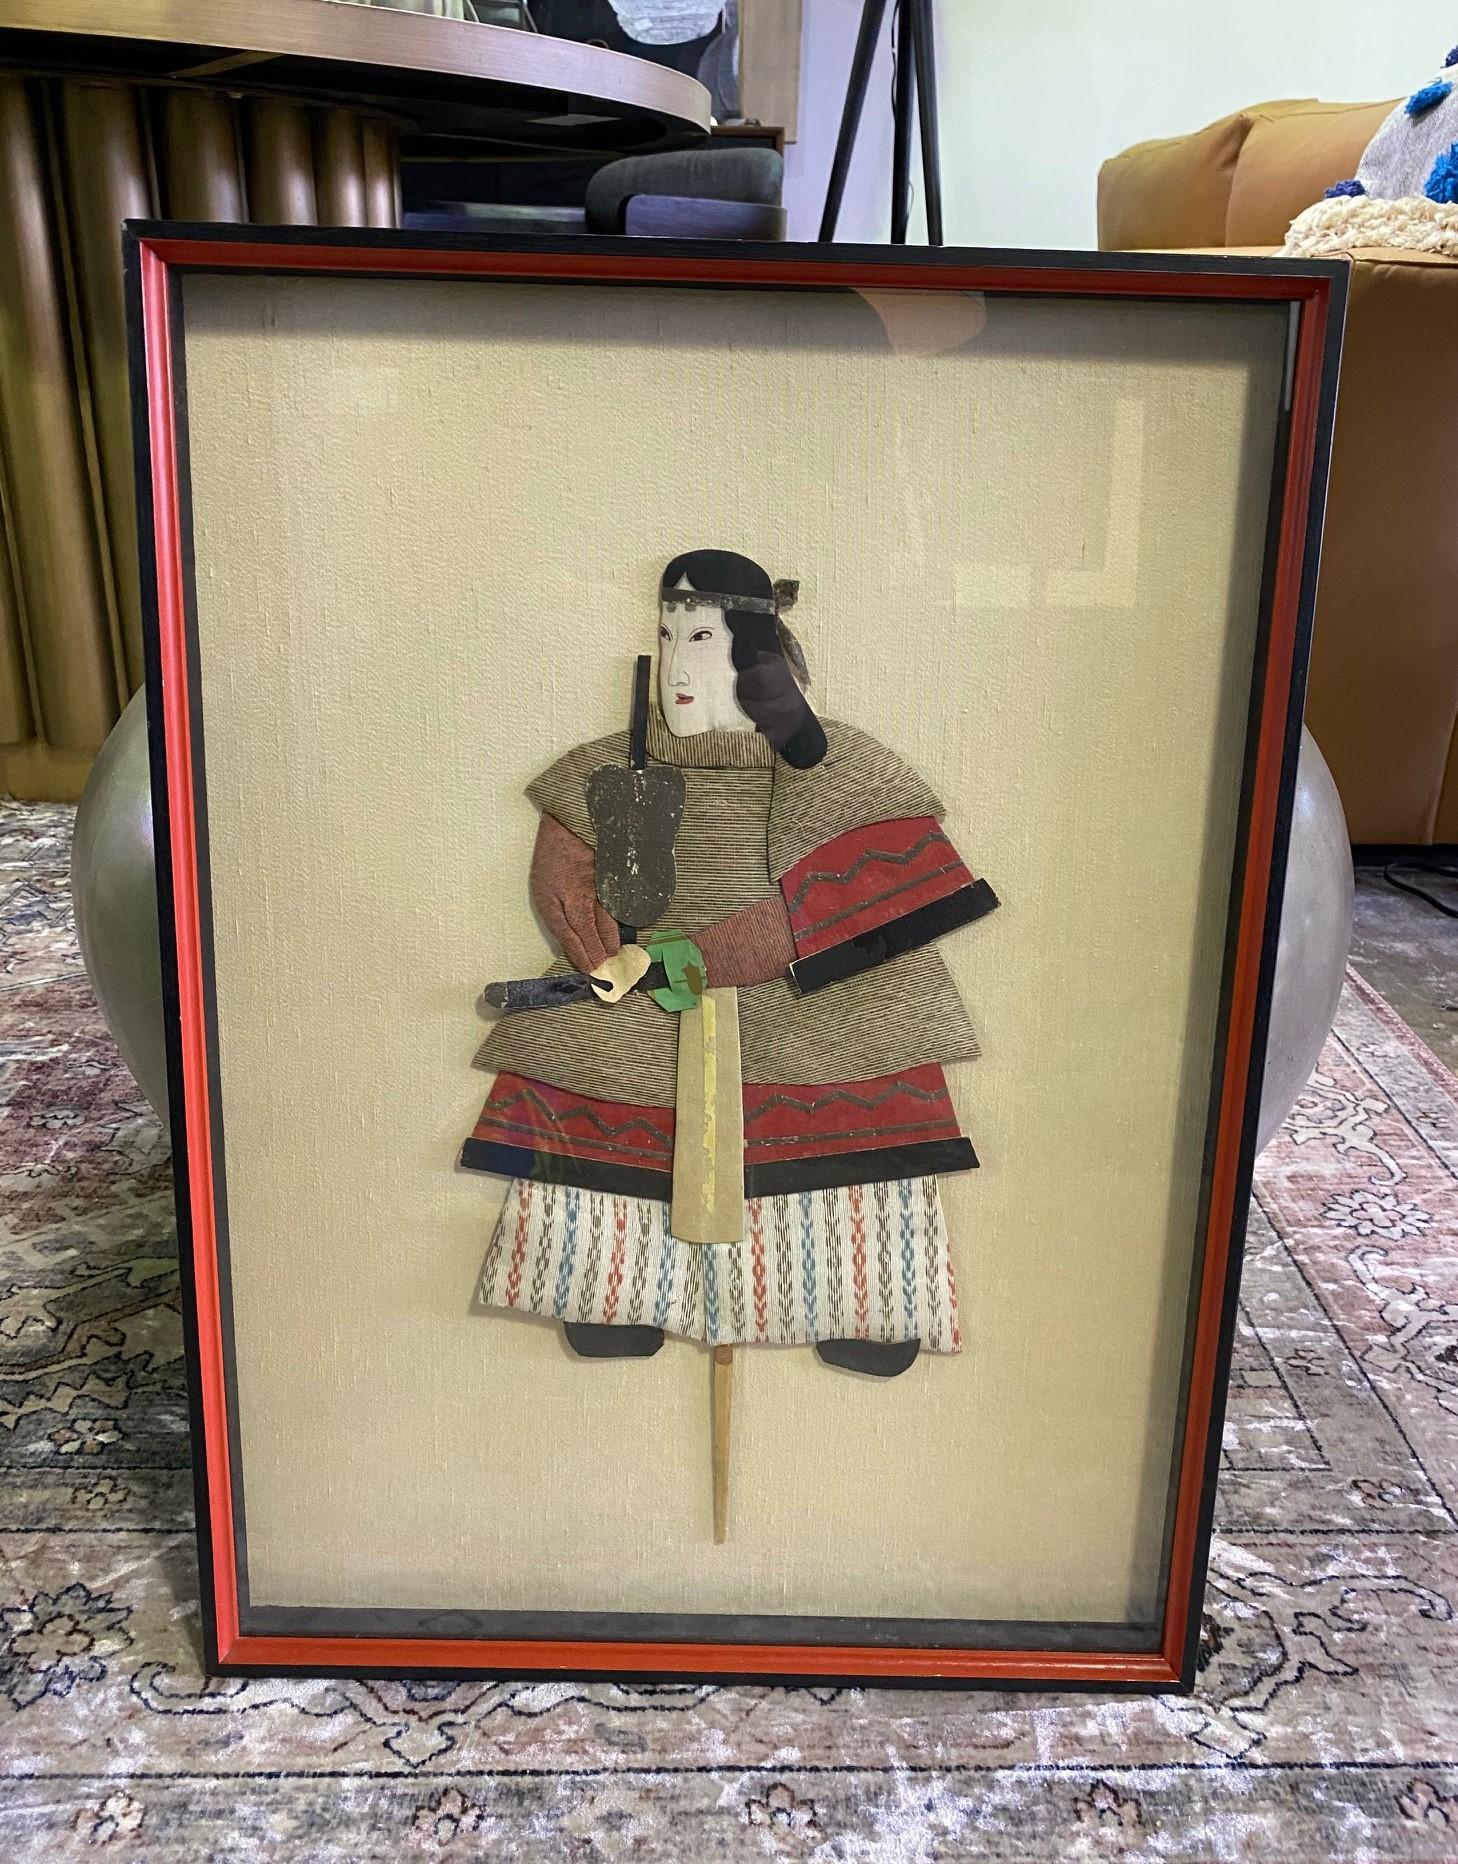 A wonderful, handcrafted work of a Japanese samurai/warrior doll shadow puppet.

Oshie, which translates as pressed pictures, is a traditional Japanese art form that can be traced back to the Edo period and usually consist of paper and sections of